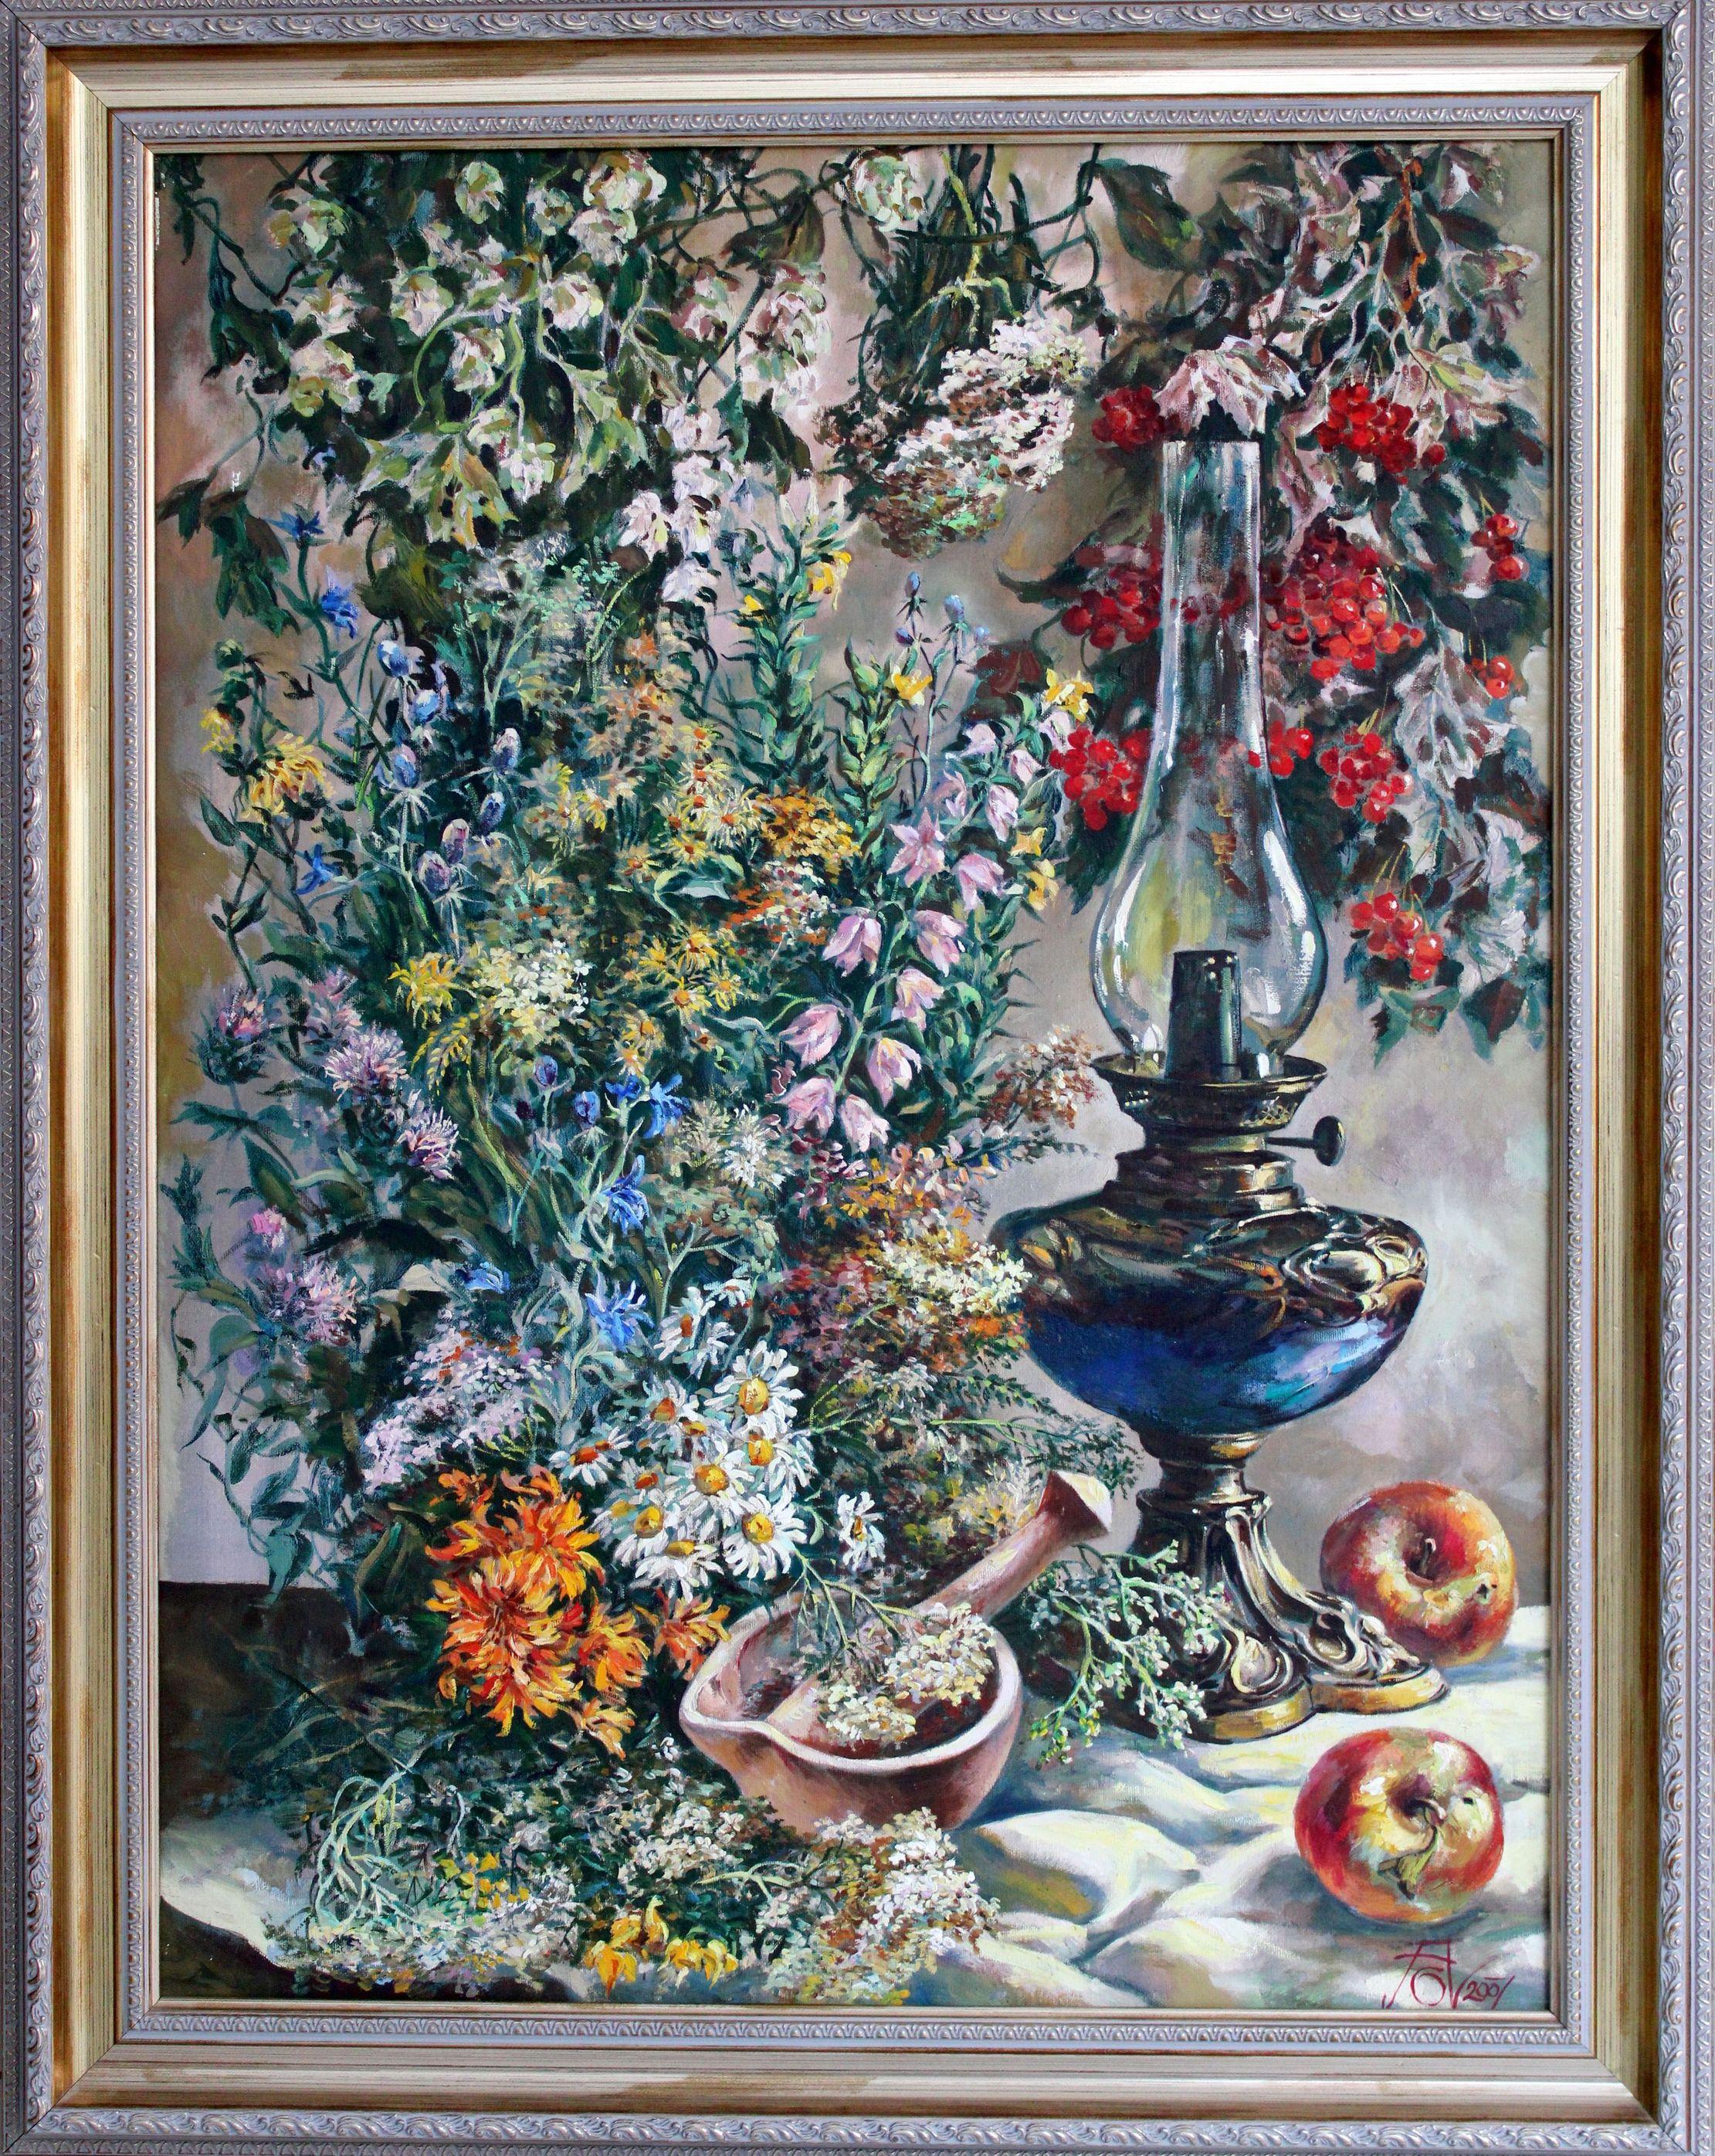 Still life with wildflowers. Oil on canvas, 80.5x60.5 cm - Painting by Andrei Gorgoc 